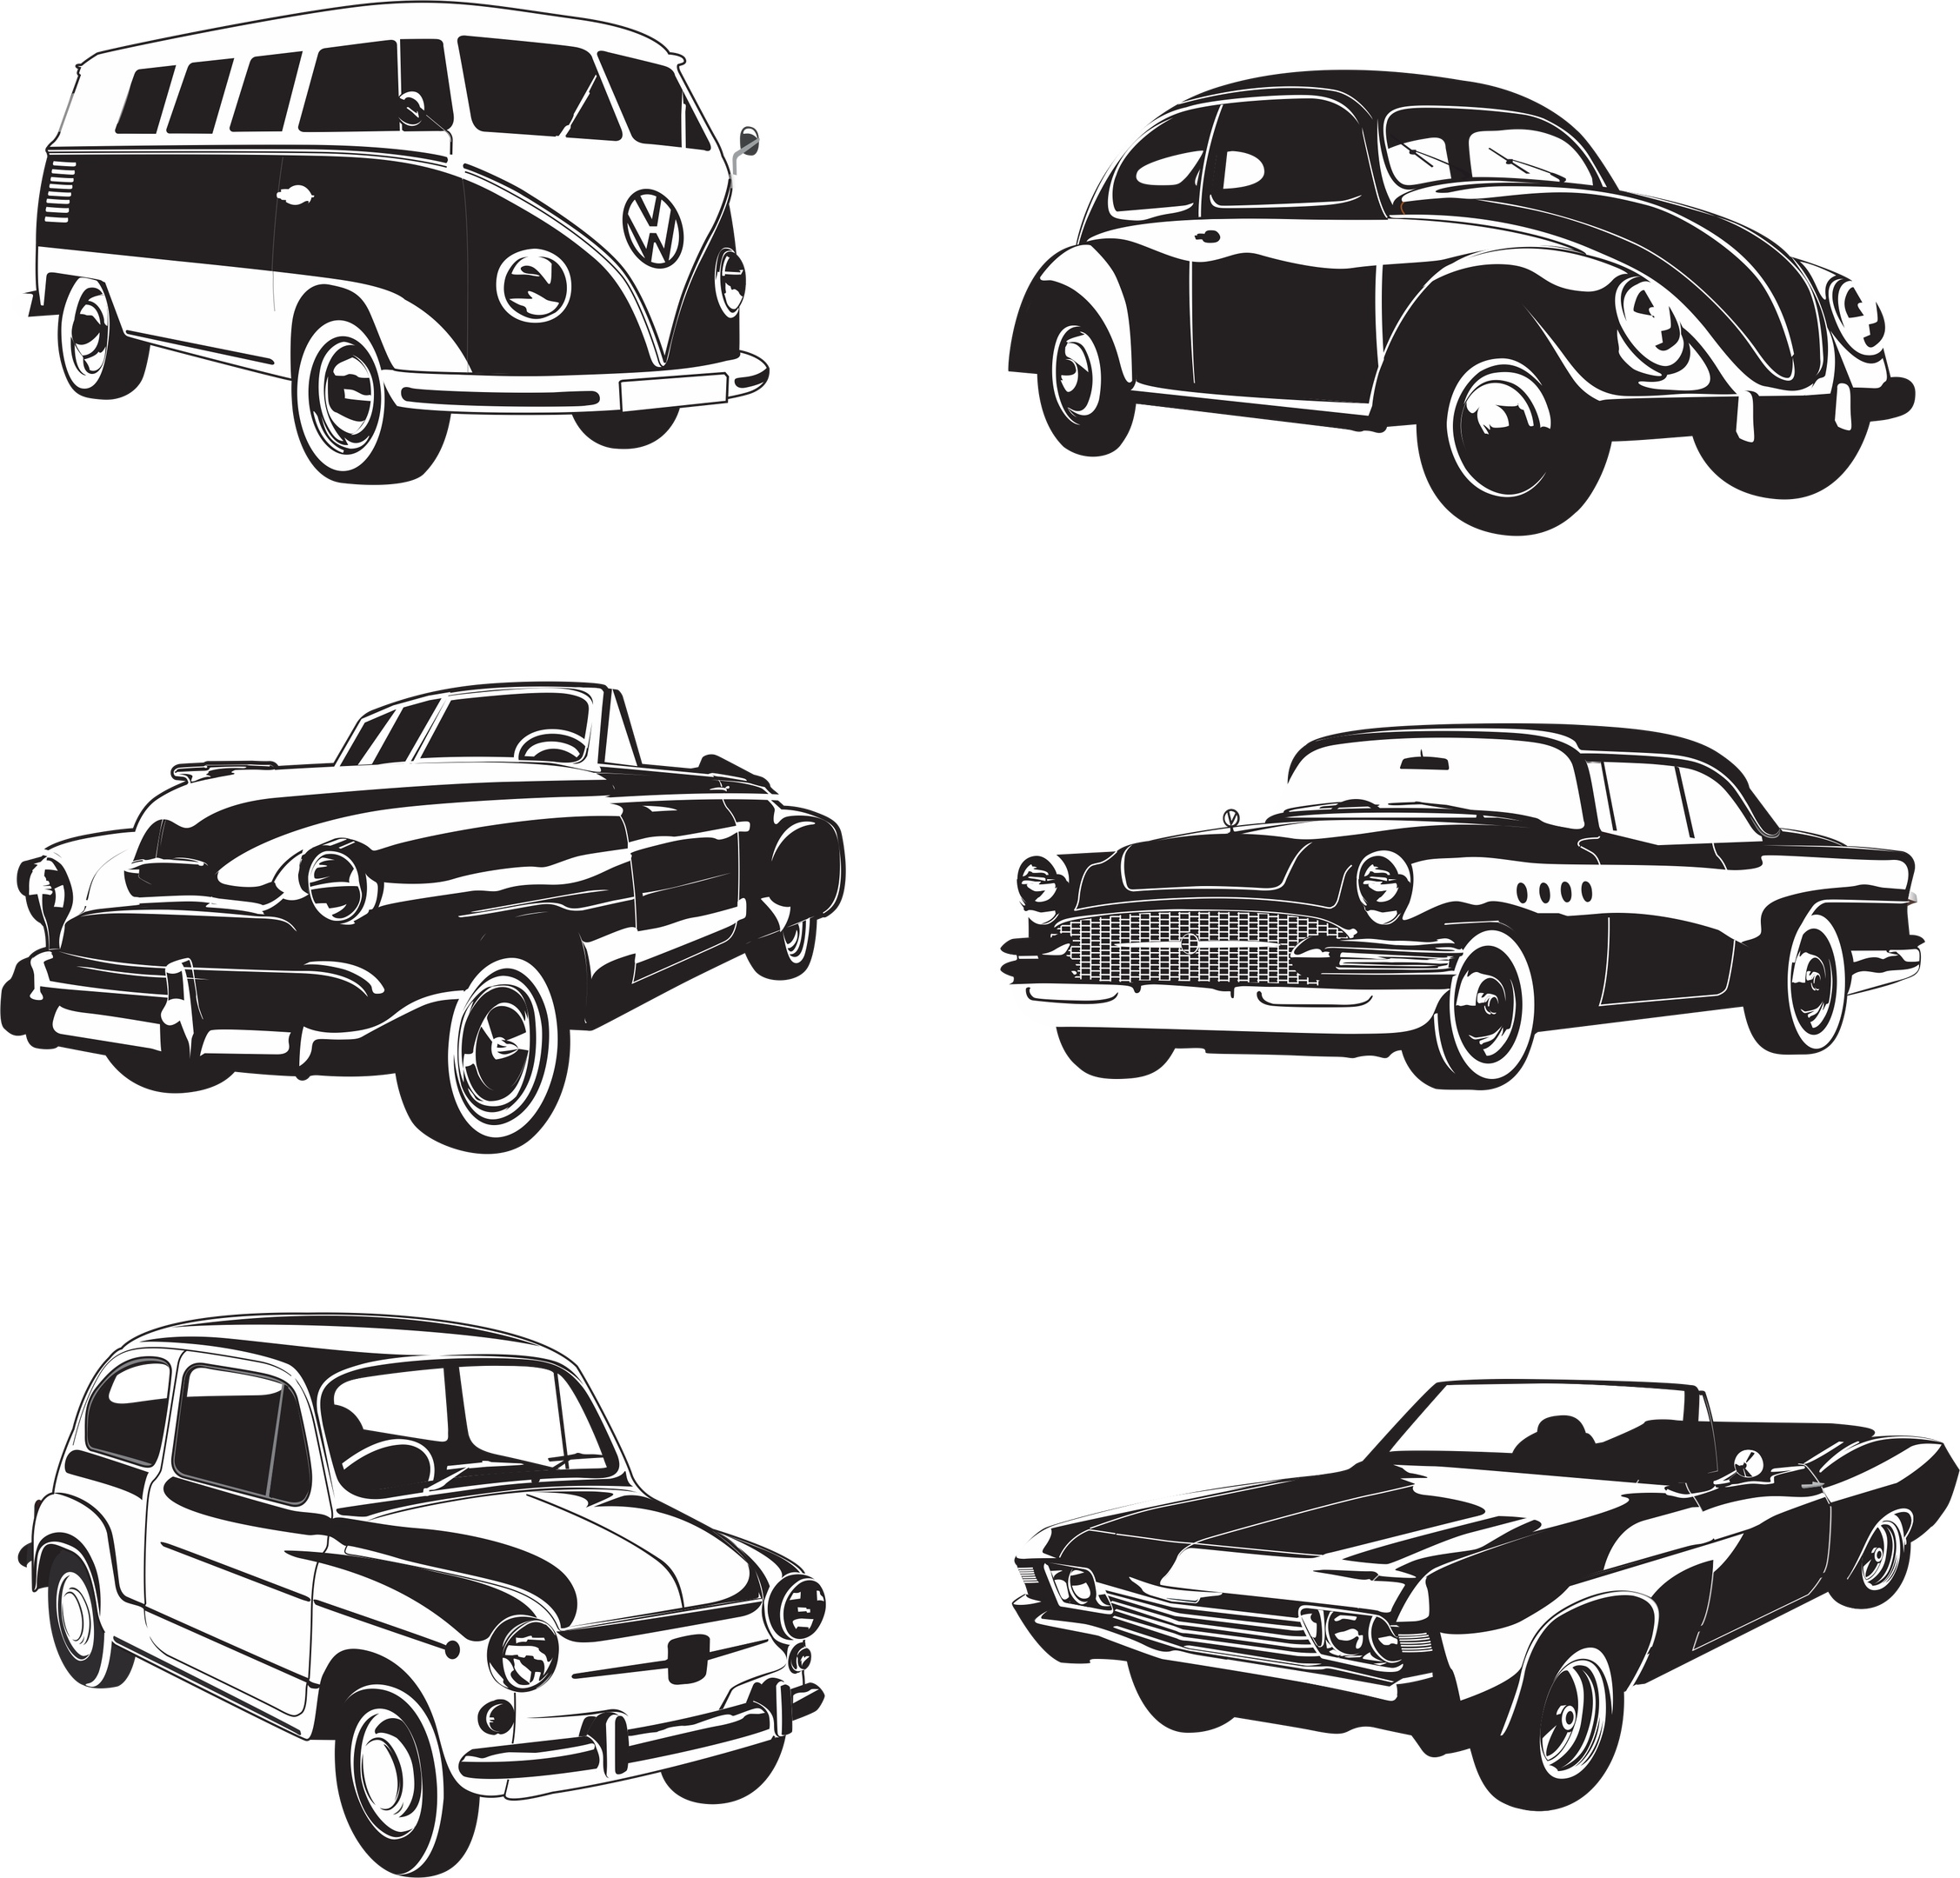 Retro Cars Vector Pack Free Vector cdr Download - 3axis.co